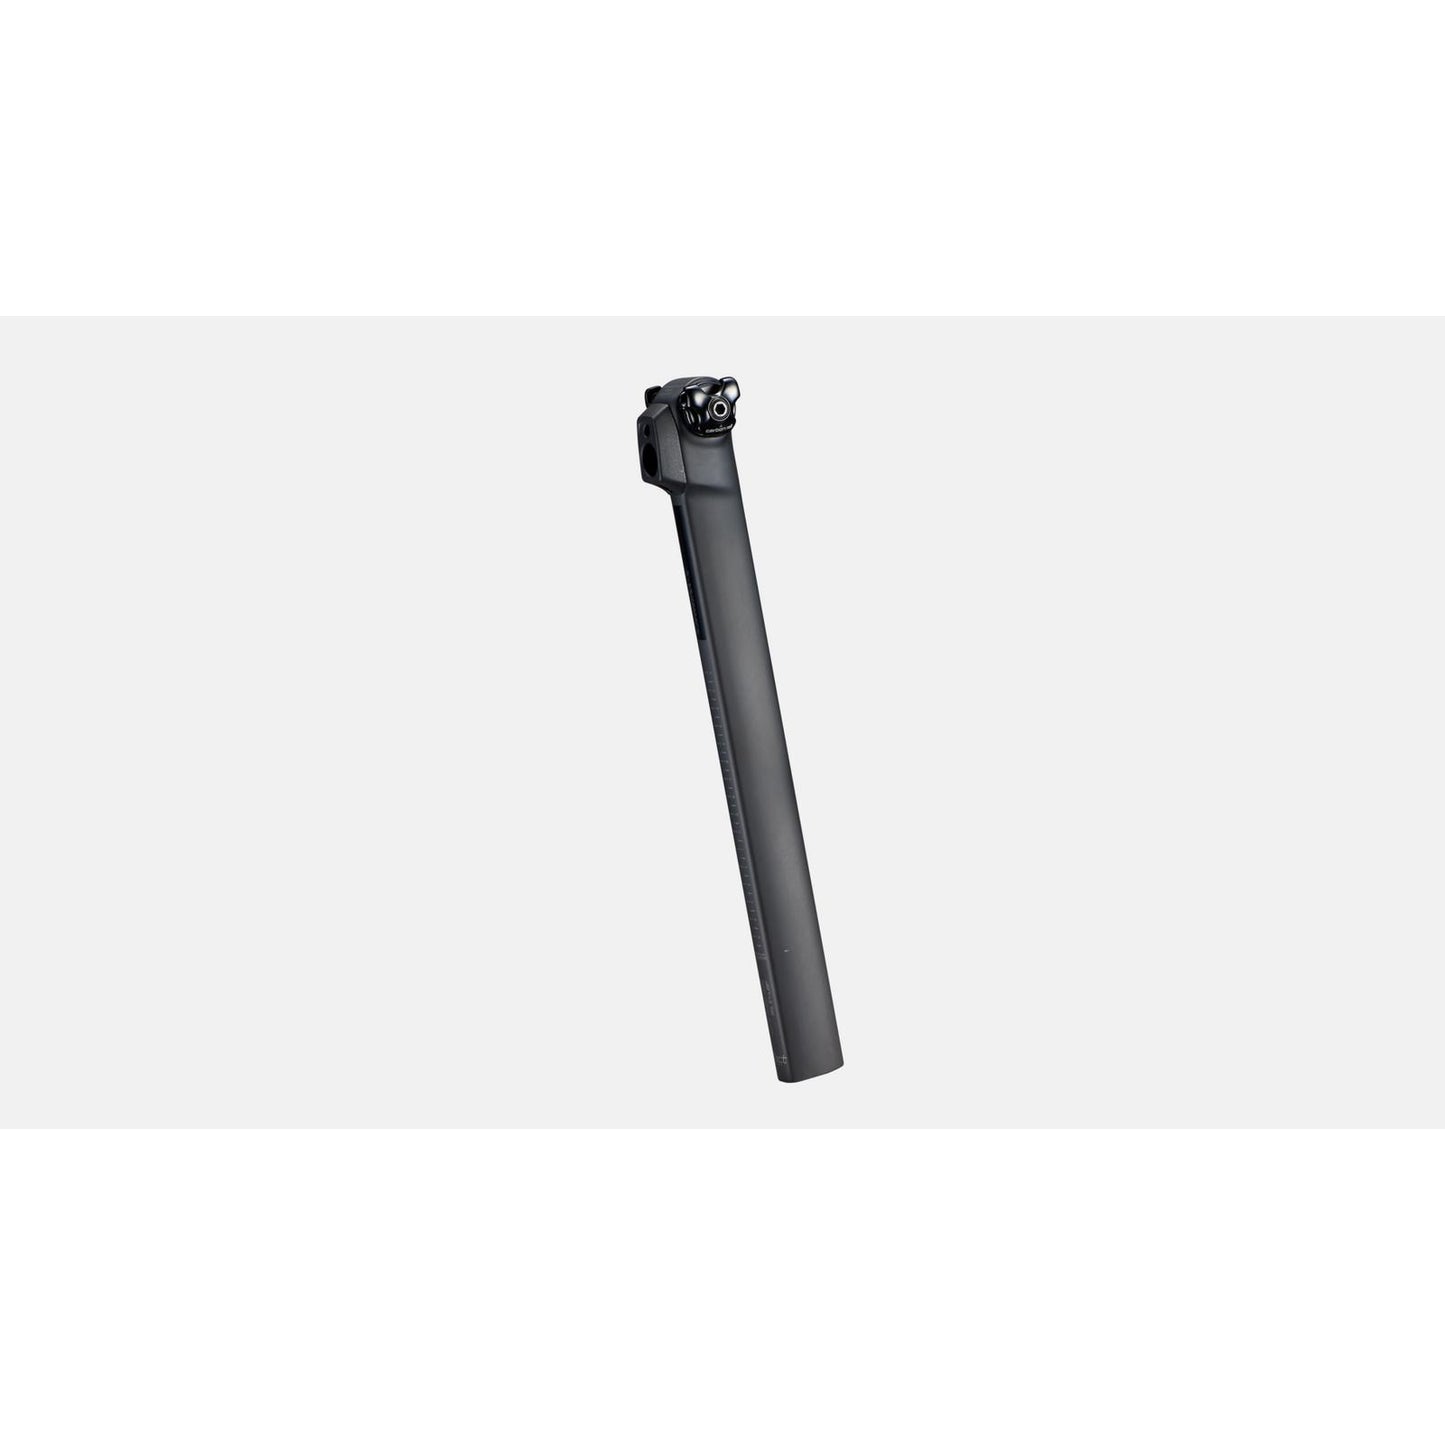 Specialized S-Works Tarmac Carbon Post - Seatposts - Bicycle Warehouse